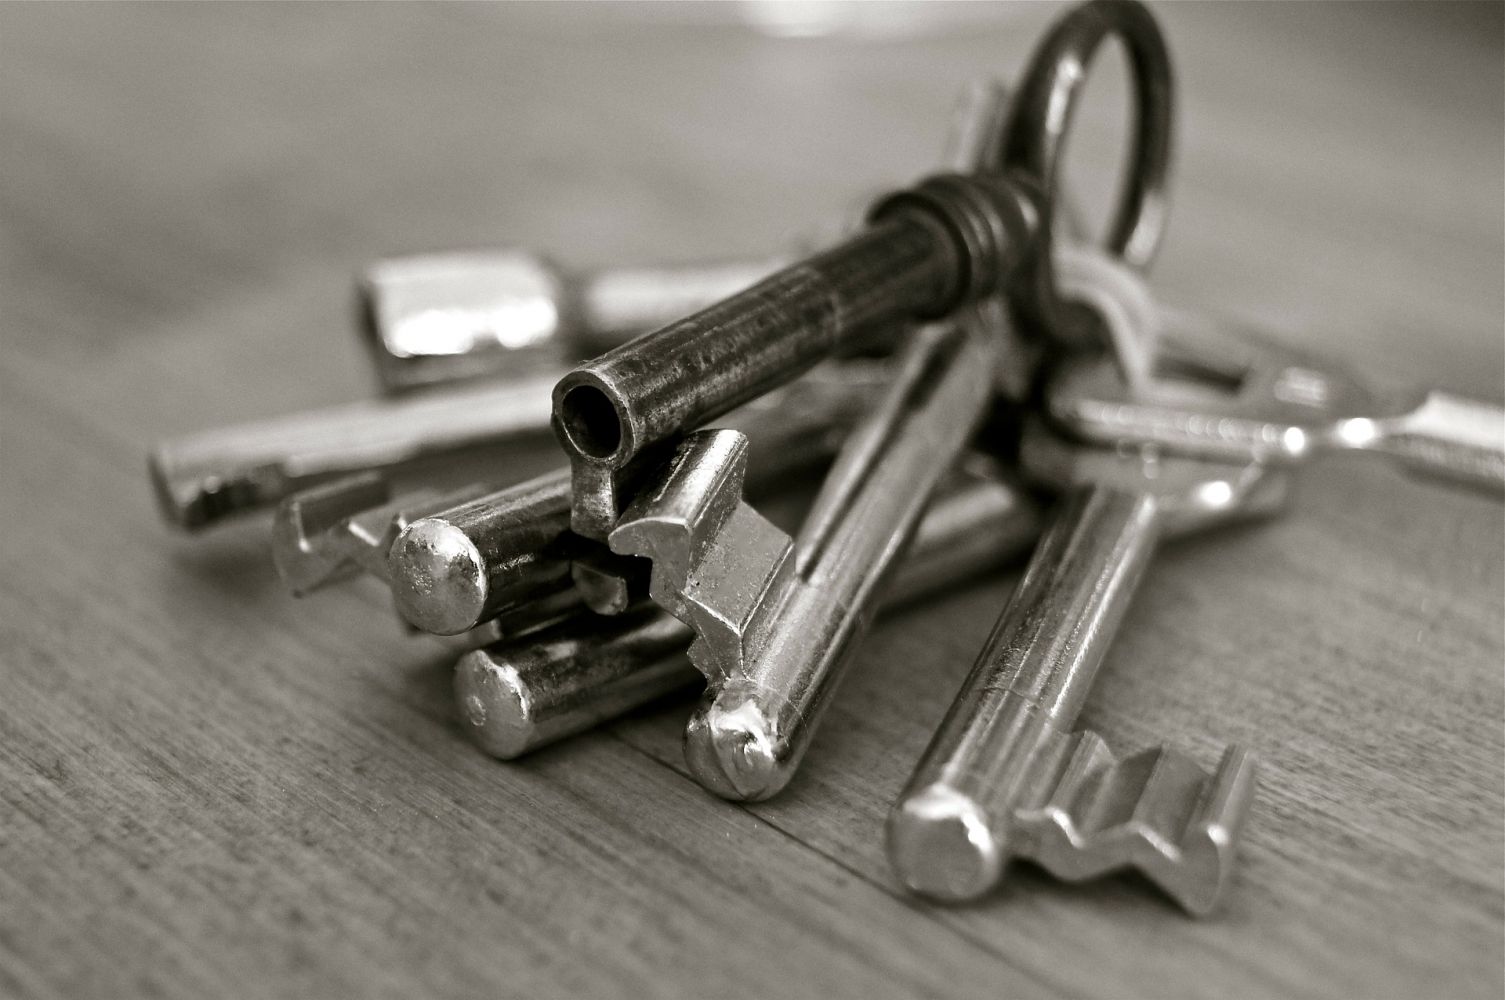 How do you secure possessions when selling your home